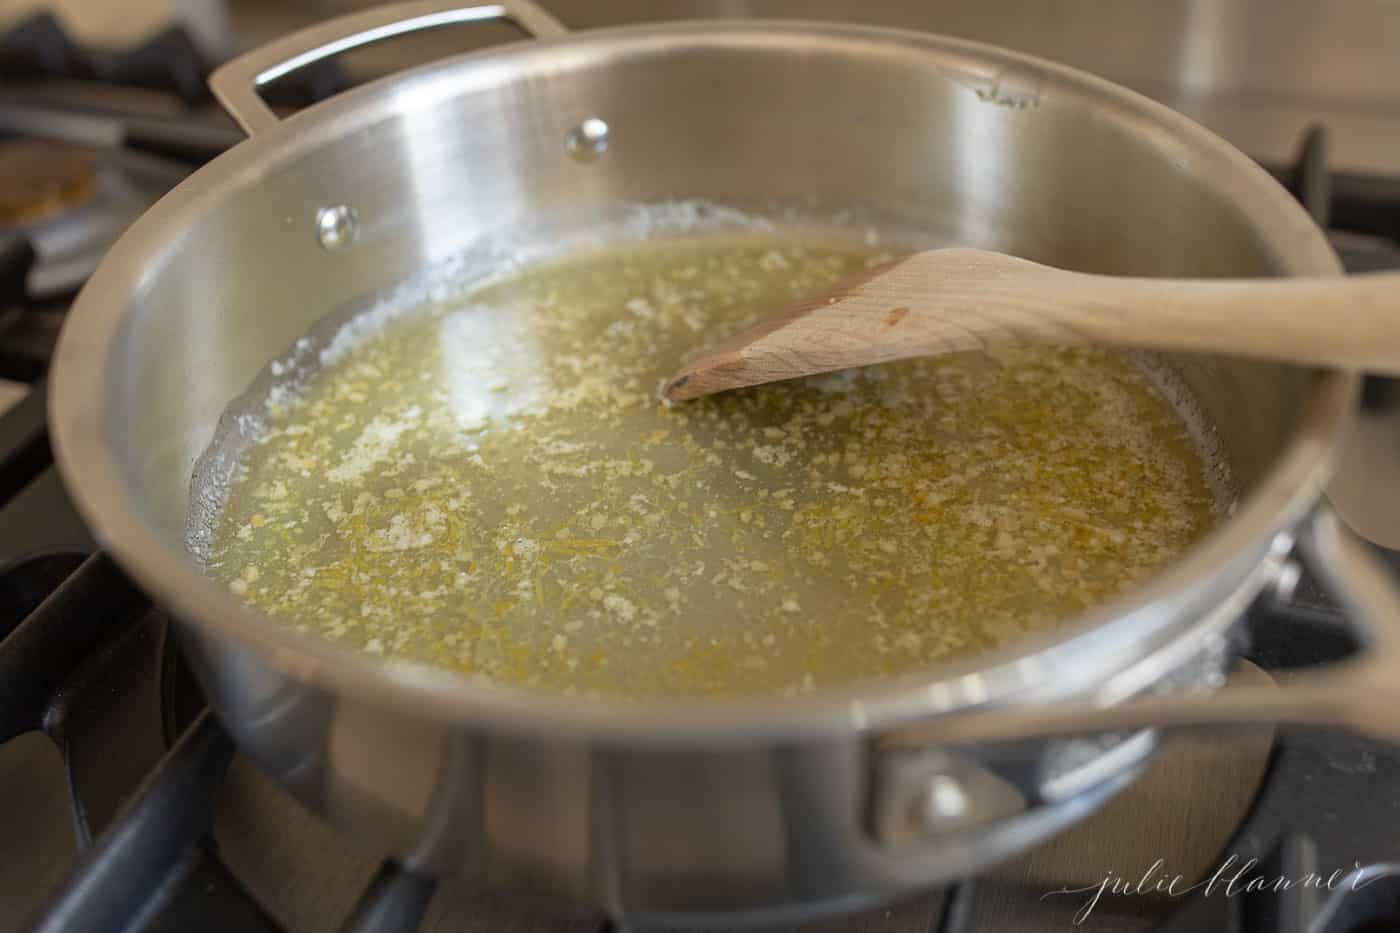 A silver pan on a stove top, melted butter and garlic being stirred with a wooden spatula.